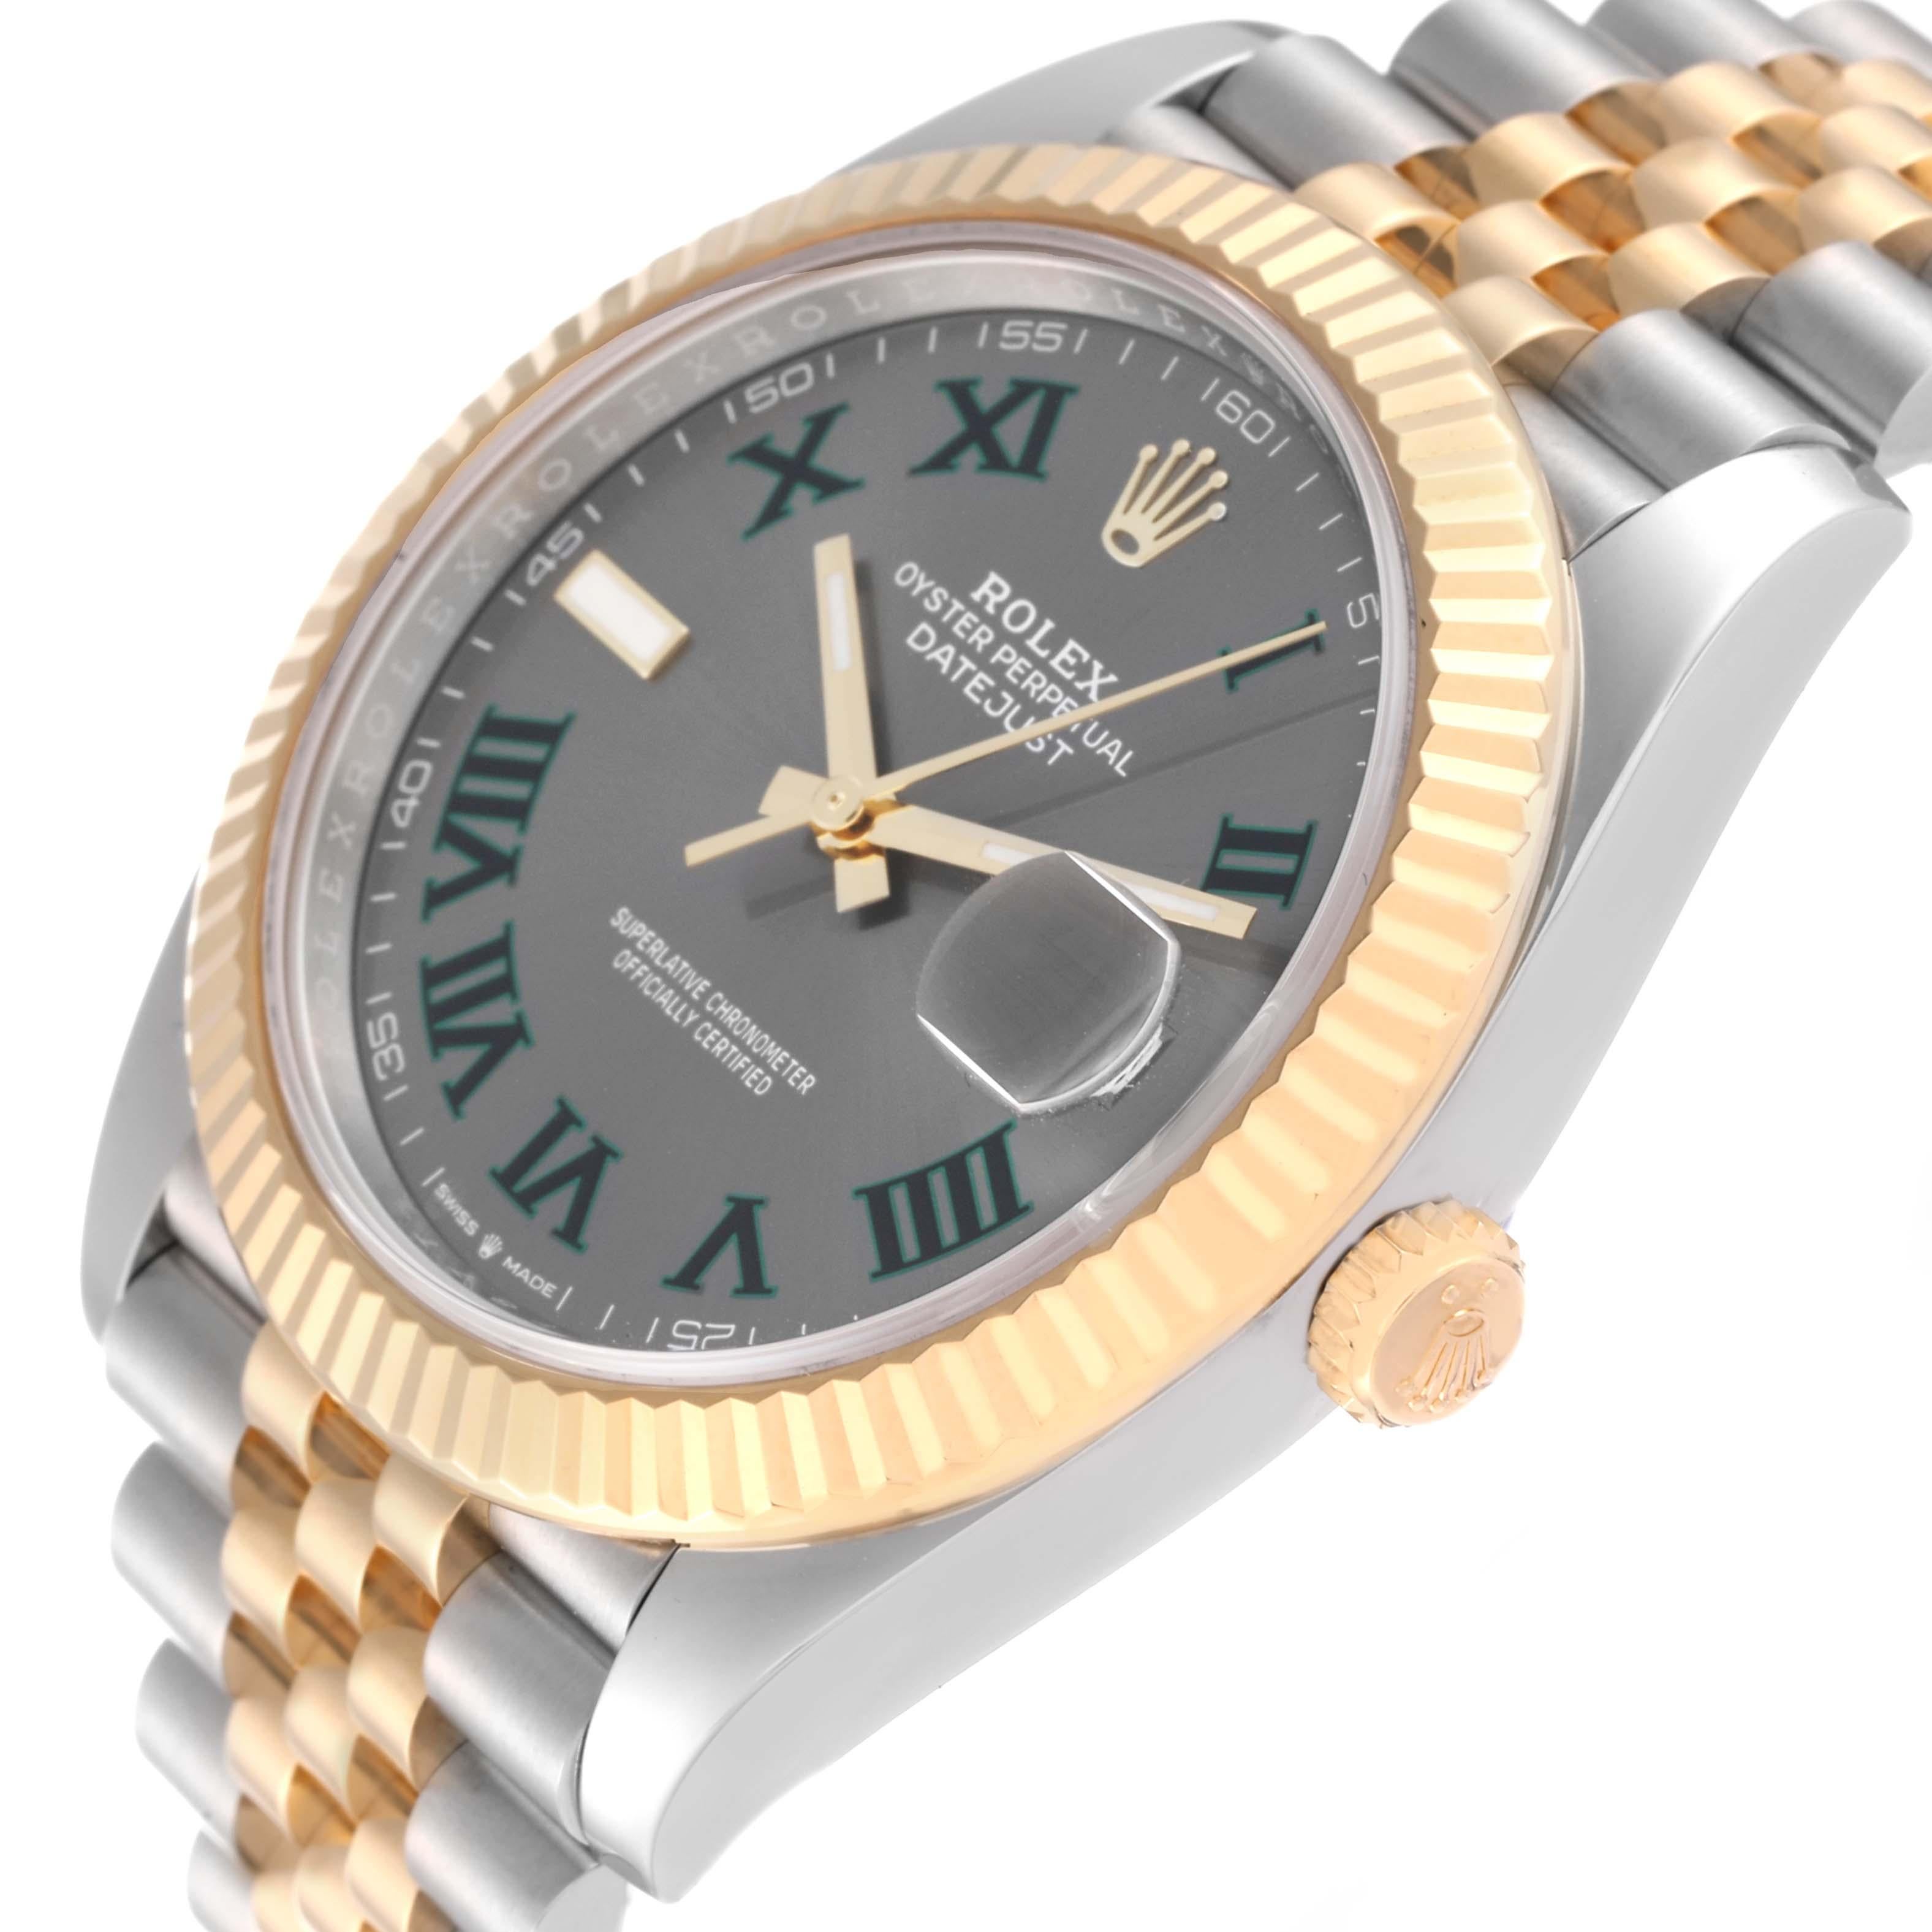 Rolex Datejust 41 Steel Yellow Gold Wimbledon Dial Mens Watch 126333. Officially certified chronometer automatic self-winding movement with quickset date. Stainless steel and 18K yellow gold case 41.0 mm in diameter. Rolex logo on the crown. 18K